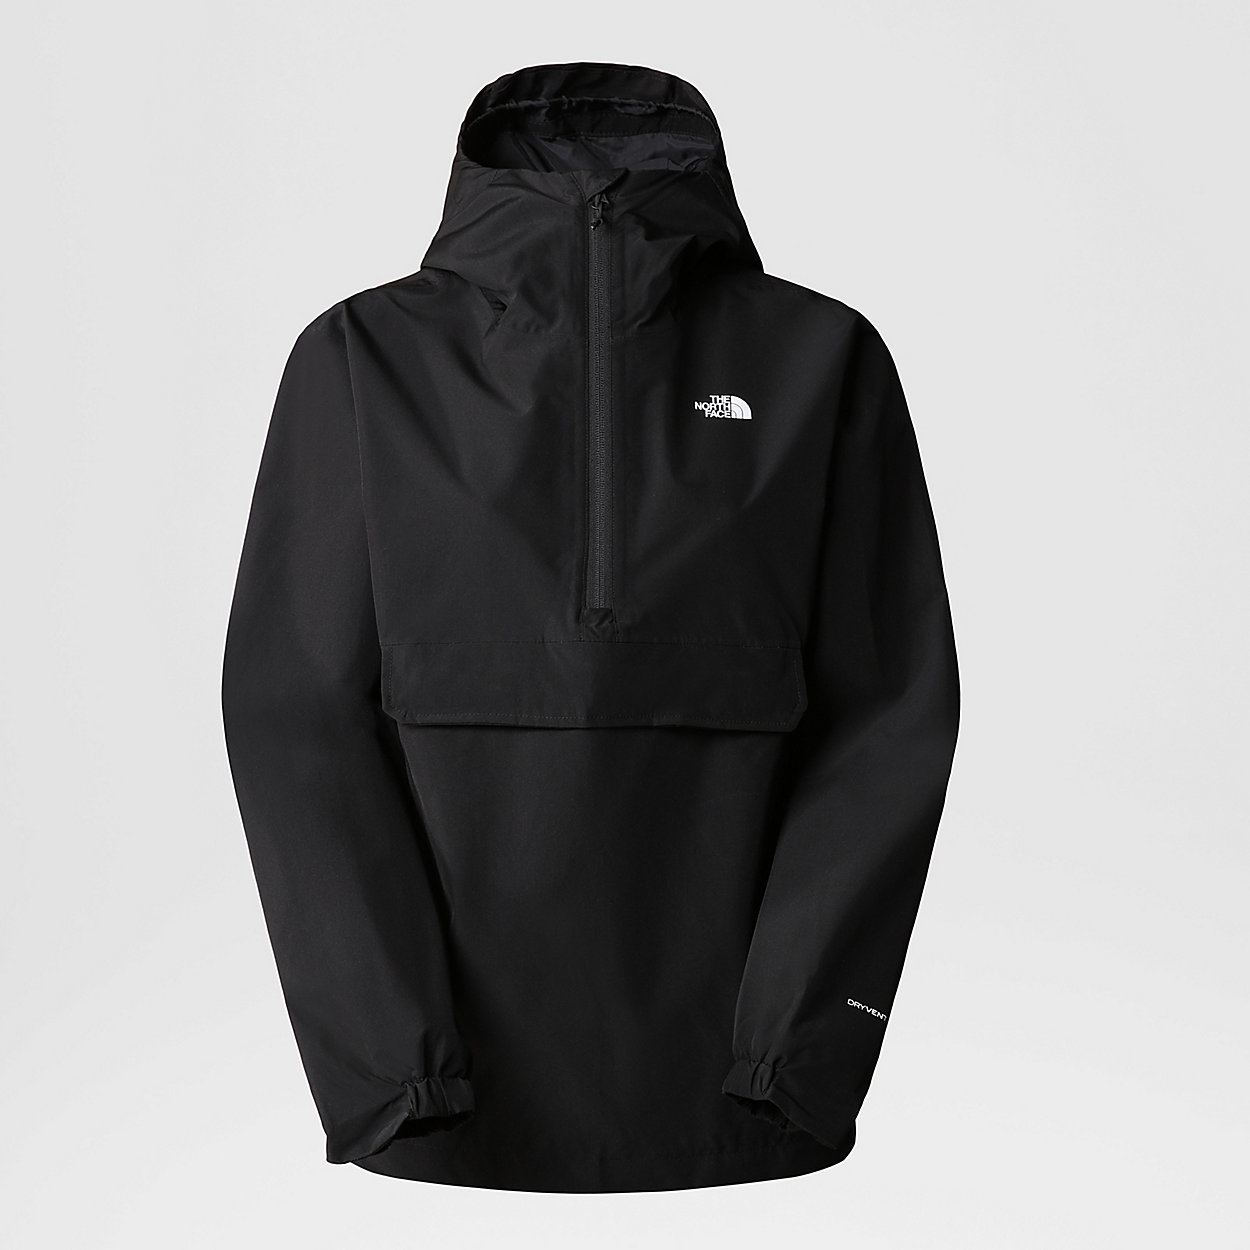 Unlock Wilderness' choice in the Napapijri Vs North Face comparison, the Waterproof Anorak by The North Face